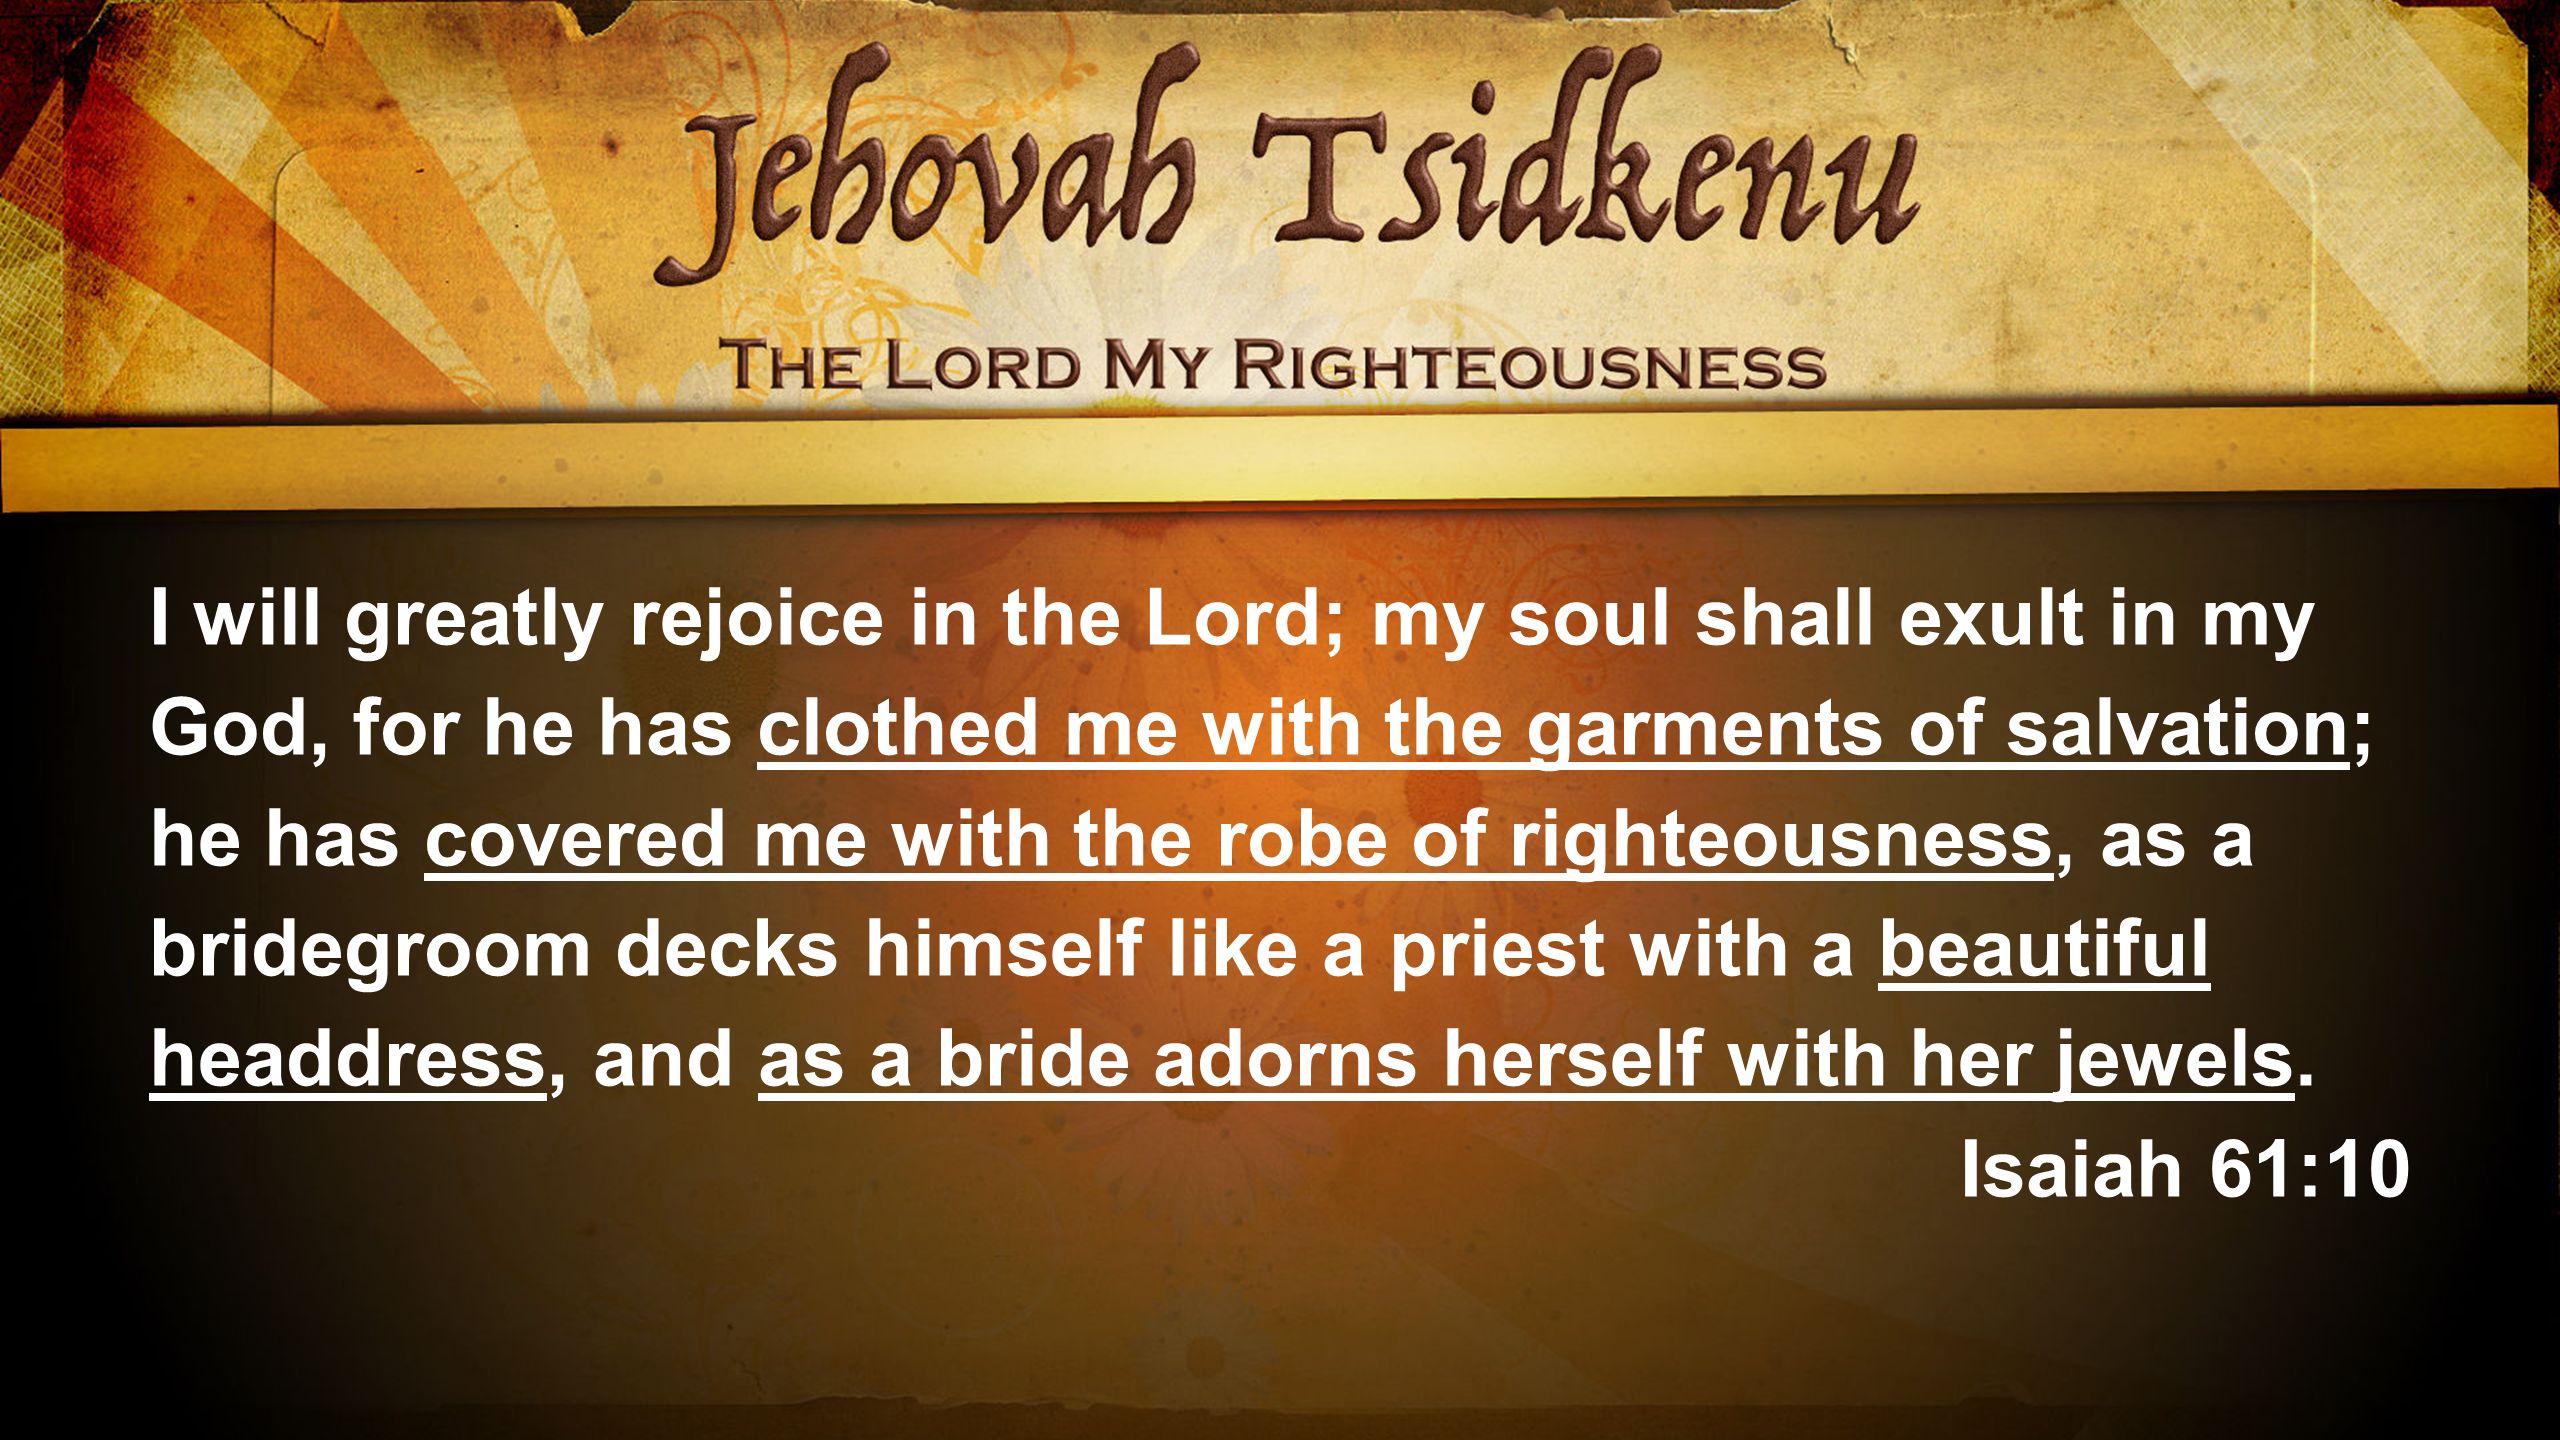 I will greatly rejoice in the Lord; my soul shall exult in my God, for he has clothed me with the garments of salvation; he has covered me with the robe of righteousness, as a bridegroom decks himself like a priest with a beautiful headdress, and as a bride adorns herself with her jewels.